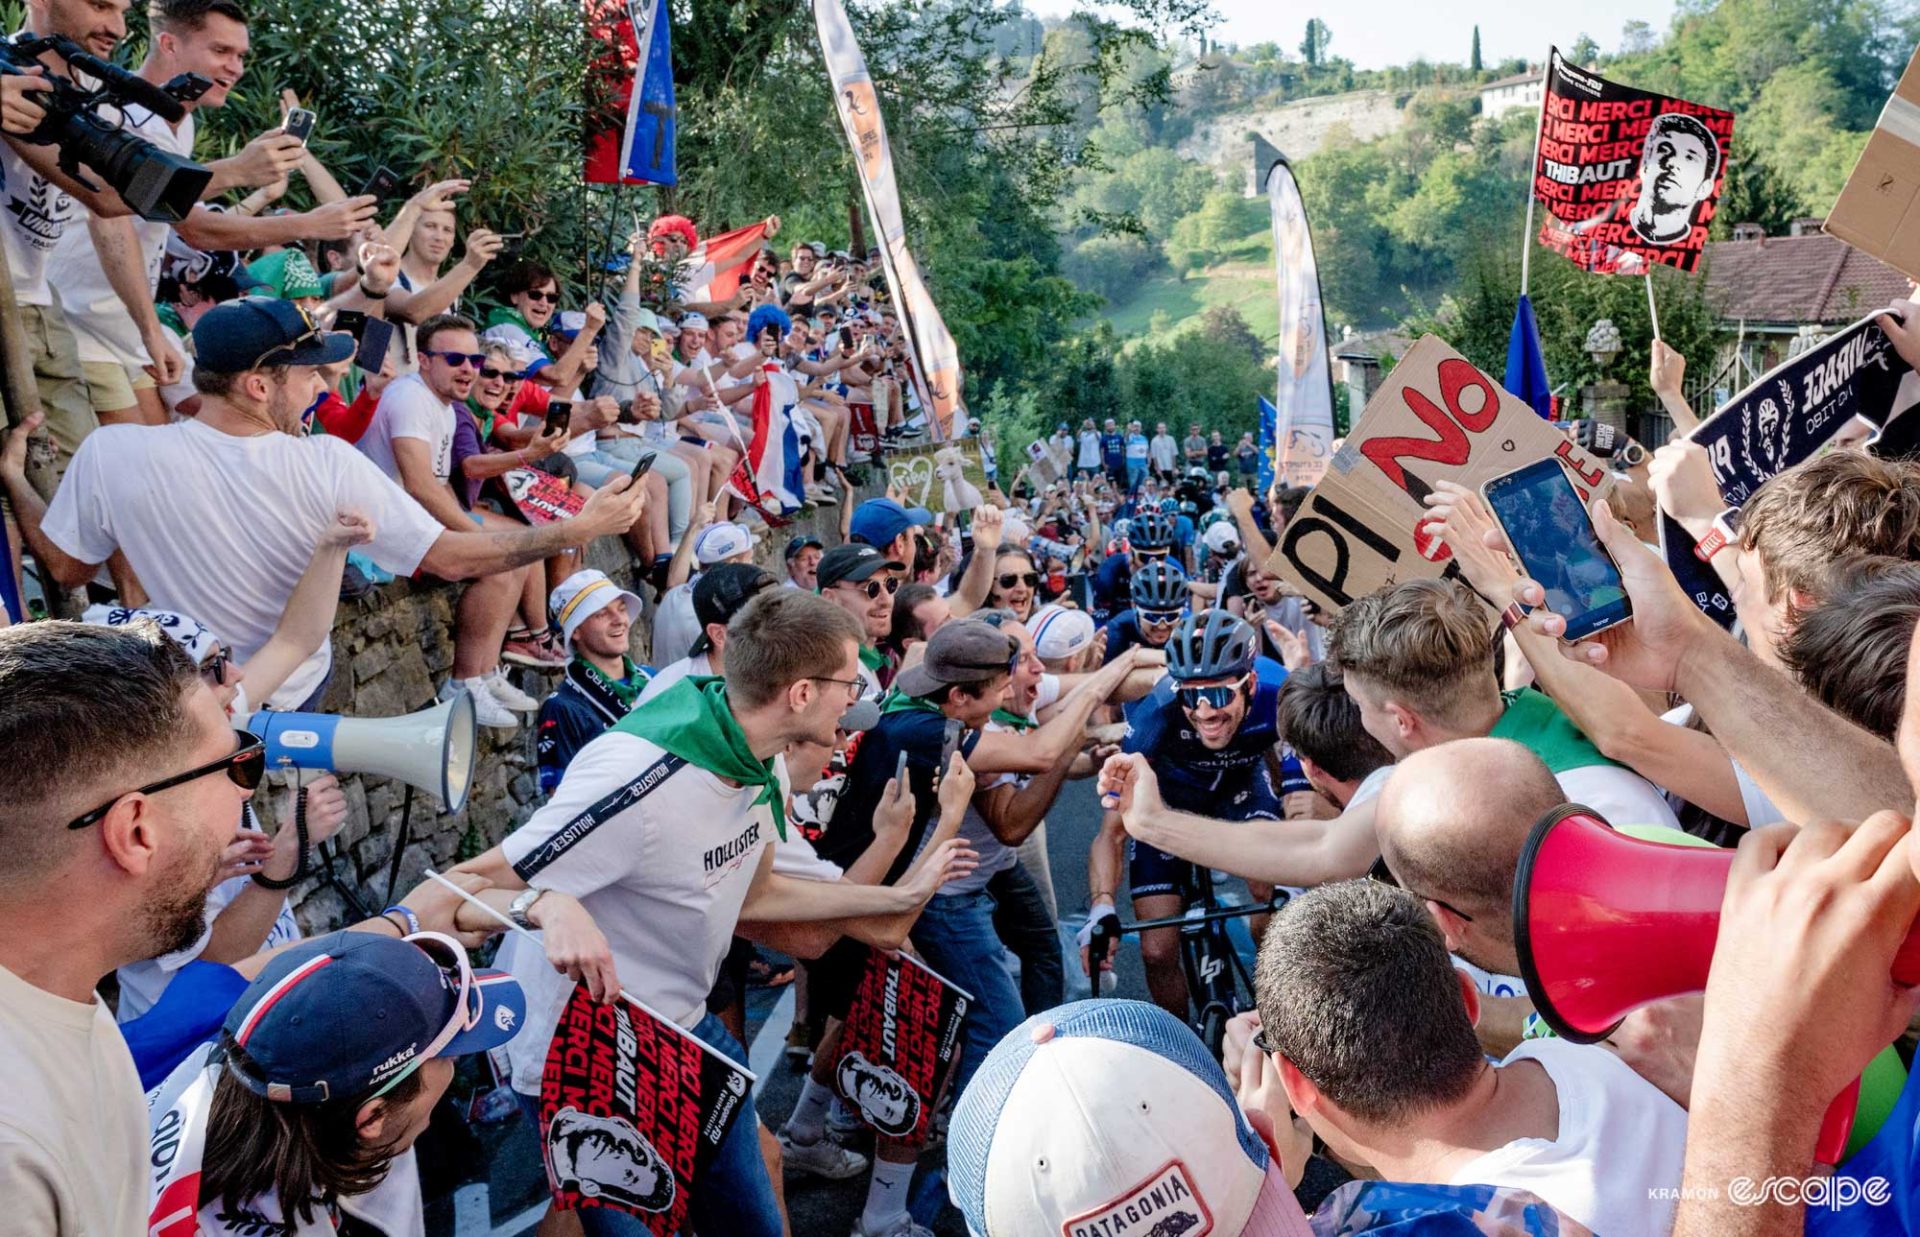 Thibaut Pinot at the centre of a swarm of flags, waving hands, and signs crowding the road.